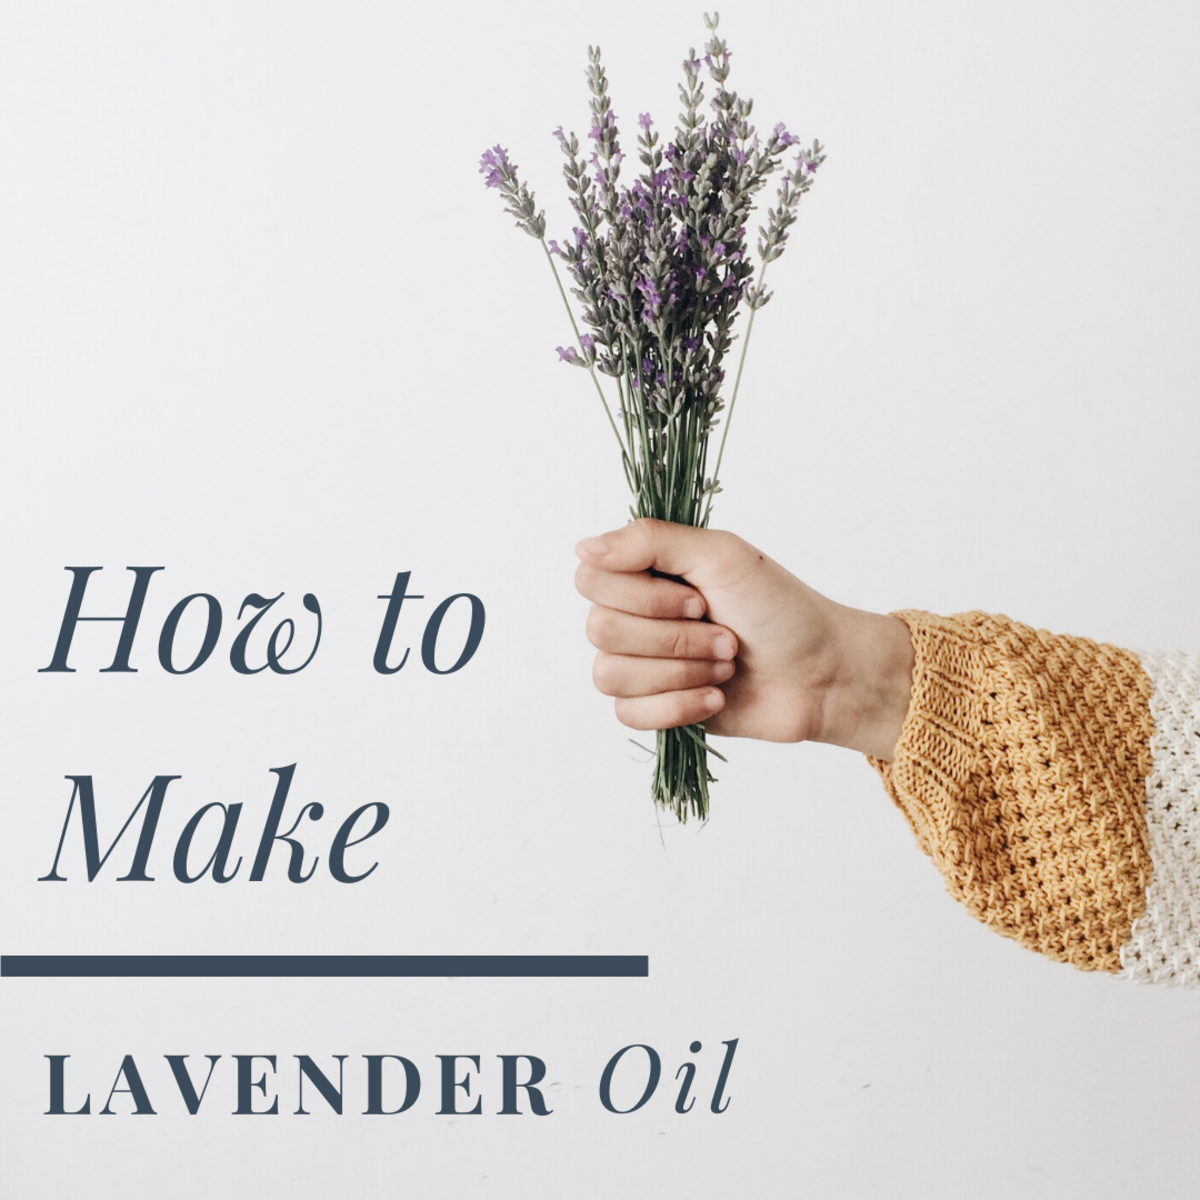 How to Make Lavender Oil